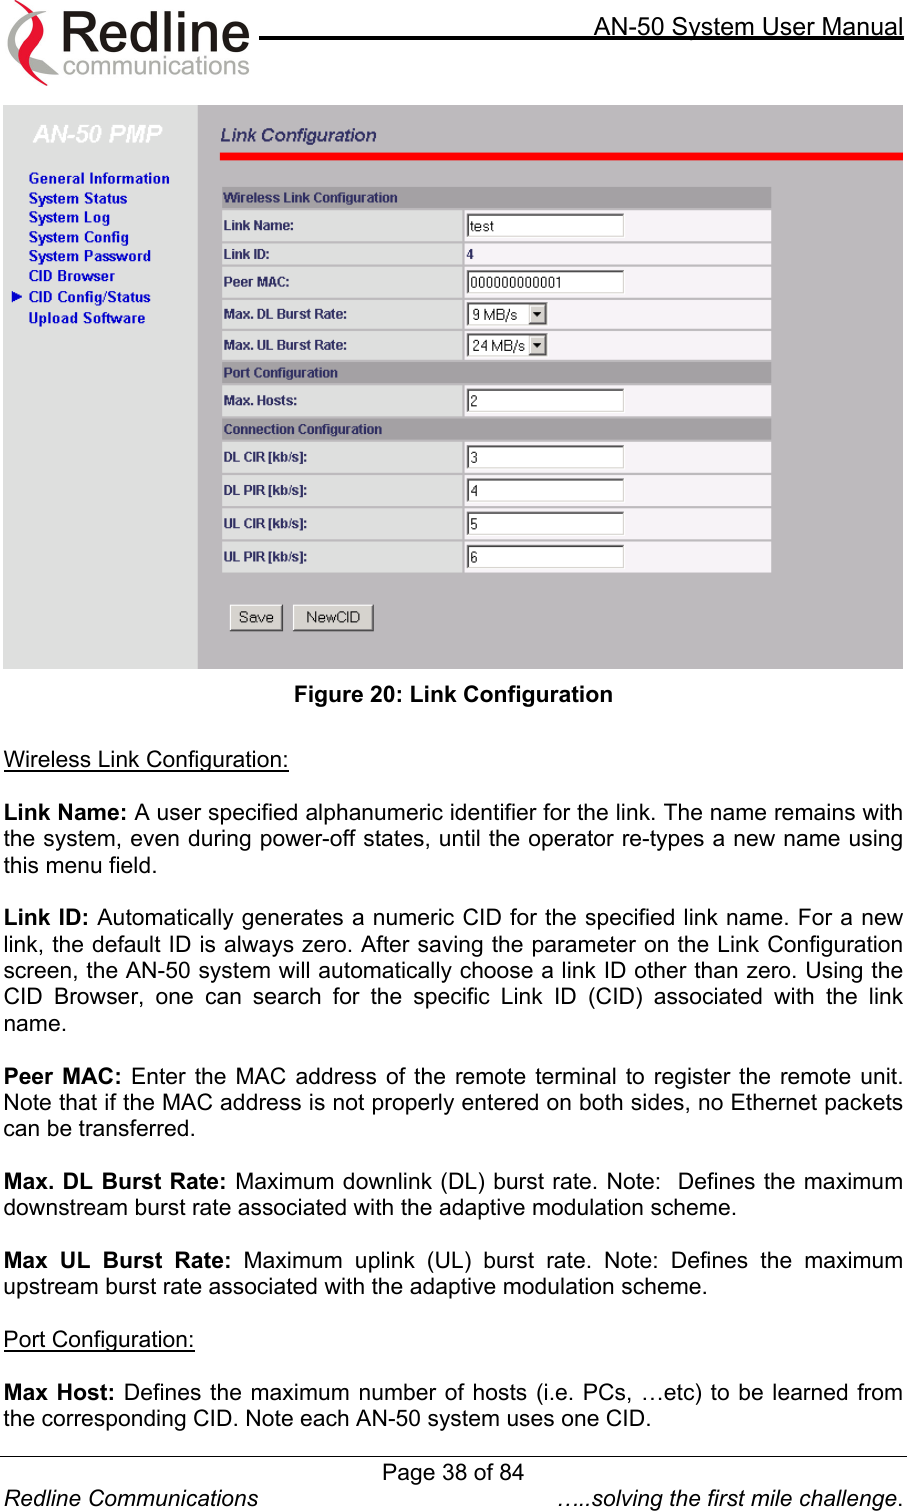     AN-50 System User Manual  Redline Communications  …..solving the first mile challenge.  Figure 20: Link Configuration  Wireless Link Configuration:  Link Name: A user specified alphanumeric identifier for the link. The name remains with the system, even during power-off states, until the operator re-types a new name using this menu field.  Link ID: Automatically generates a numeric CID for the specified link name. For a new link, the default ID is always zero. After saving the parameter on the Link Configuration screen, the AN-50 system will automatically choose a link ID other than zero. Using the CID Browser, one can search for the specific Link ID (CID) associated with the link name.  Peer MAC: Enter the MAC address of the remote terminal to register the remote unit.  Note that if the MAC address is not properly entered on both sides, no Ethernet packets can be transferred.   Max. DL Burst Rate: Maximum downlink (DL) burst rate. Note:  Defines the maximum downstream burst rate associated with the adaptive modulation scheme.  Max UL Burst Rate: Maximum uplink (UL) burst rate. Note: Defines the maximum upstream burst rate associated with the adaptive modulation scheme.  Port Configuration:  Max Host: Defines the maximum number of hosts (i.e. PCs, …etc) to be learned from the corresponding CID. Note each AN-50 system uses one CID. Page 38 of 84